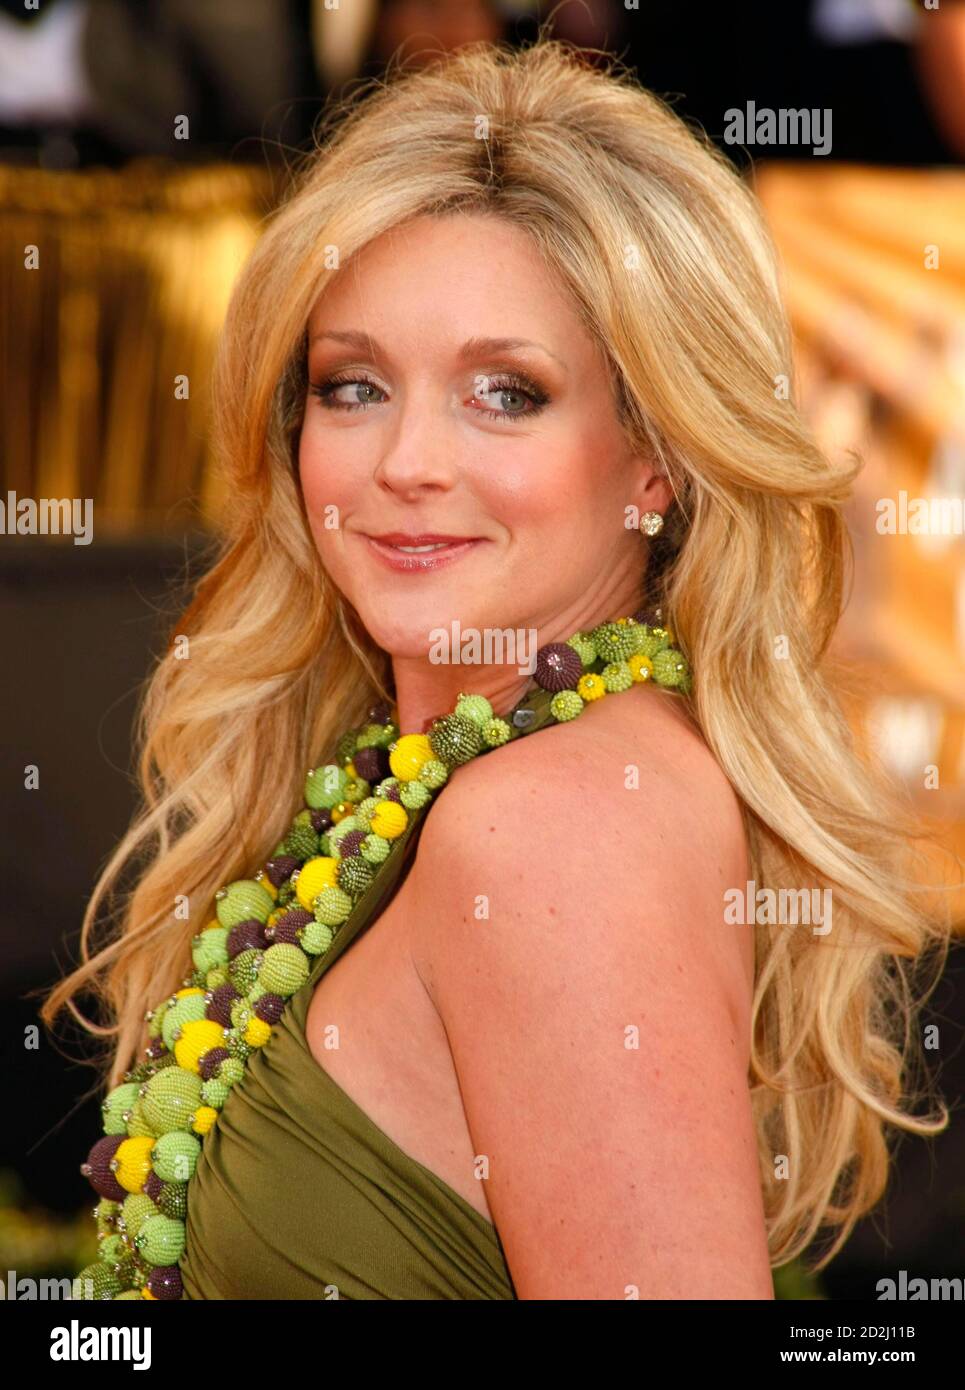 Actress Jane Krakowski from television show '30 Rock'' arrives at the 14th annual Screen Actors Guild Awards in Los Angeles January 27, 2008.  REUTERS/Mike Blake    (UNITED STATES) Stock Photo